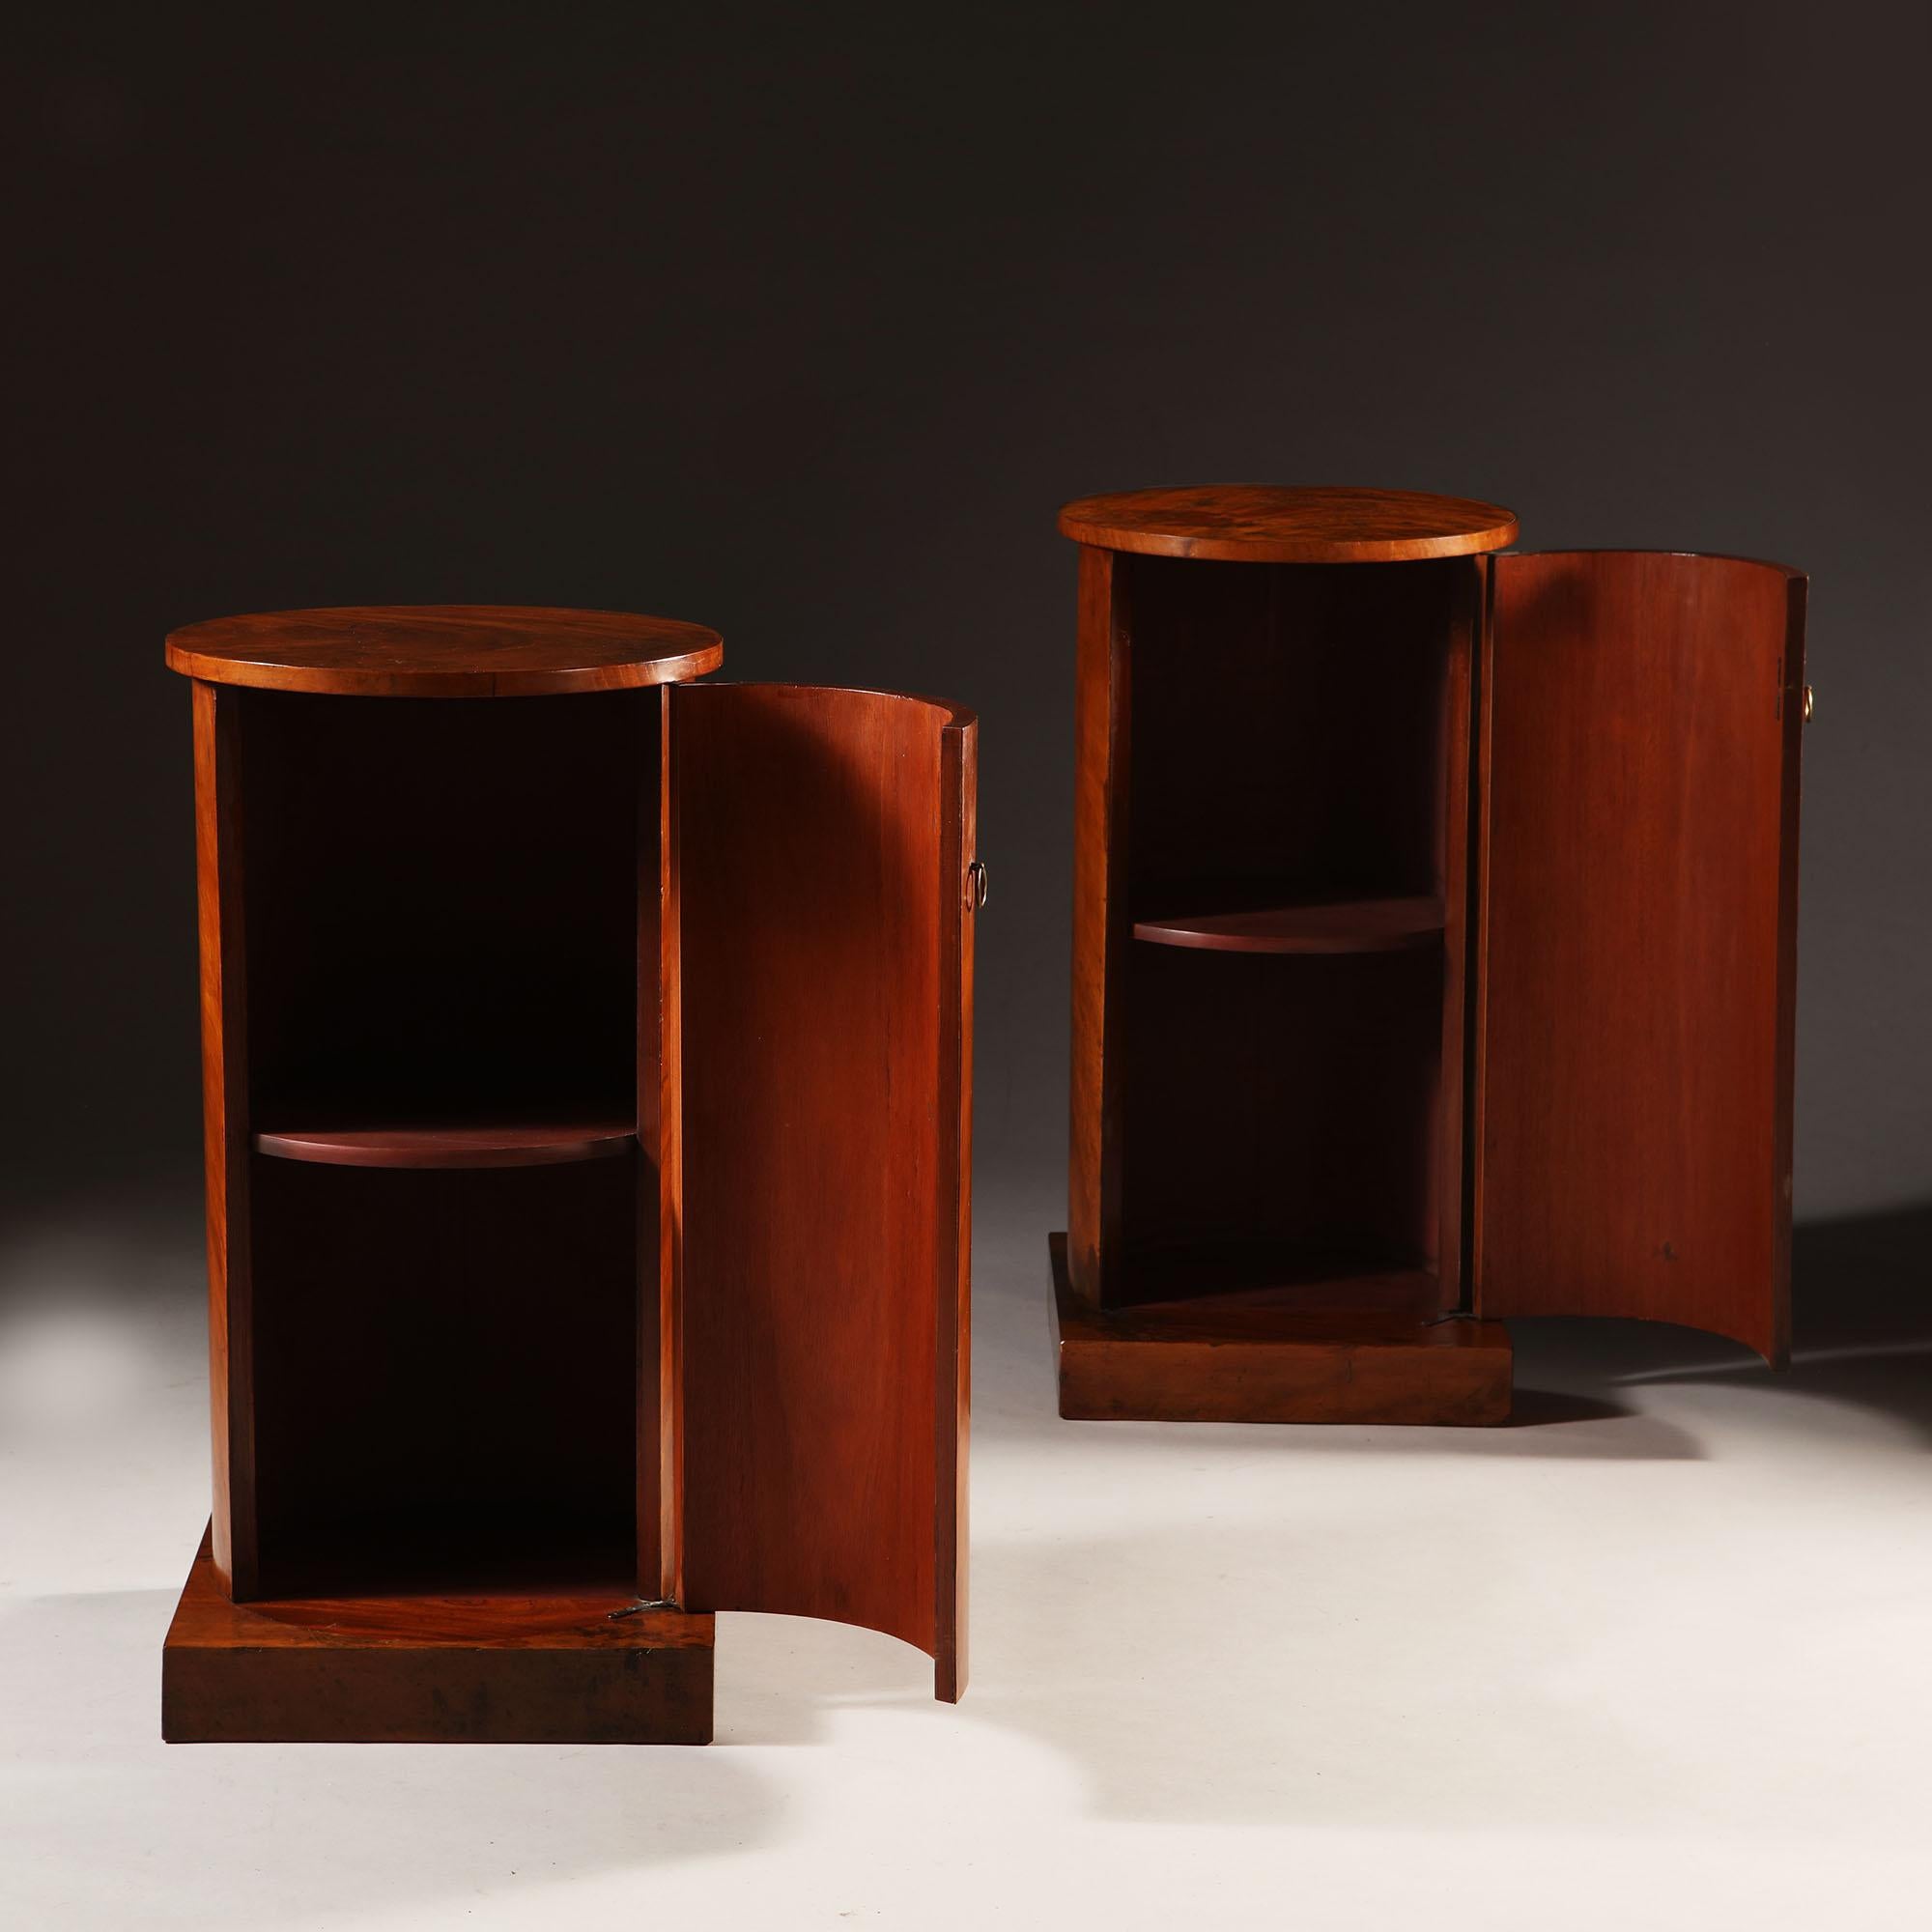 A pair of 19th century English flame mahogany wood bedside cupboards / tables in the form of pedestals, each with one door to the front opening to reveal two shelves, with brass loop handles to the doors, all supported on square plinth bases.